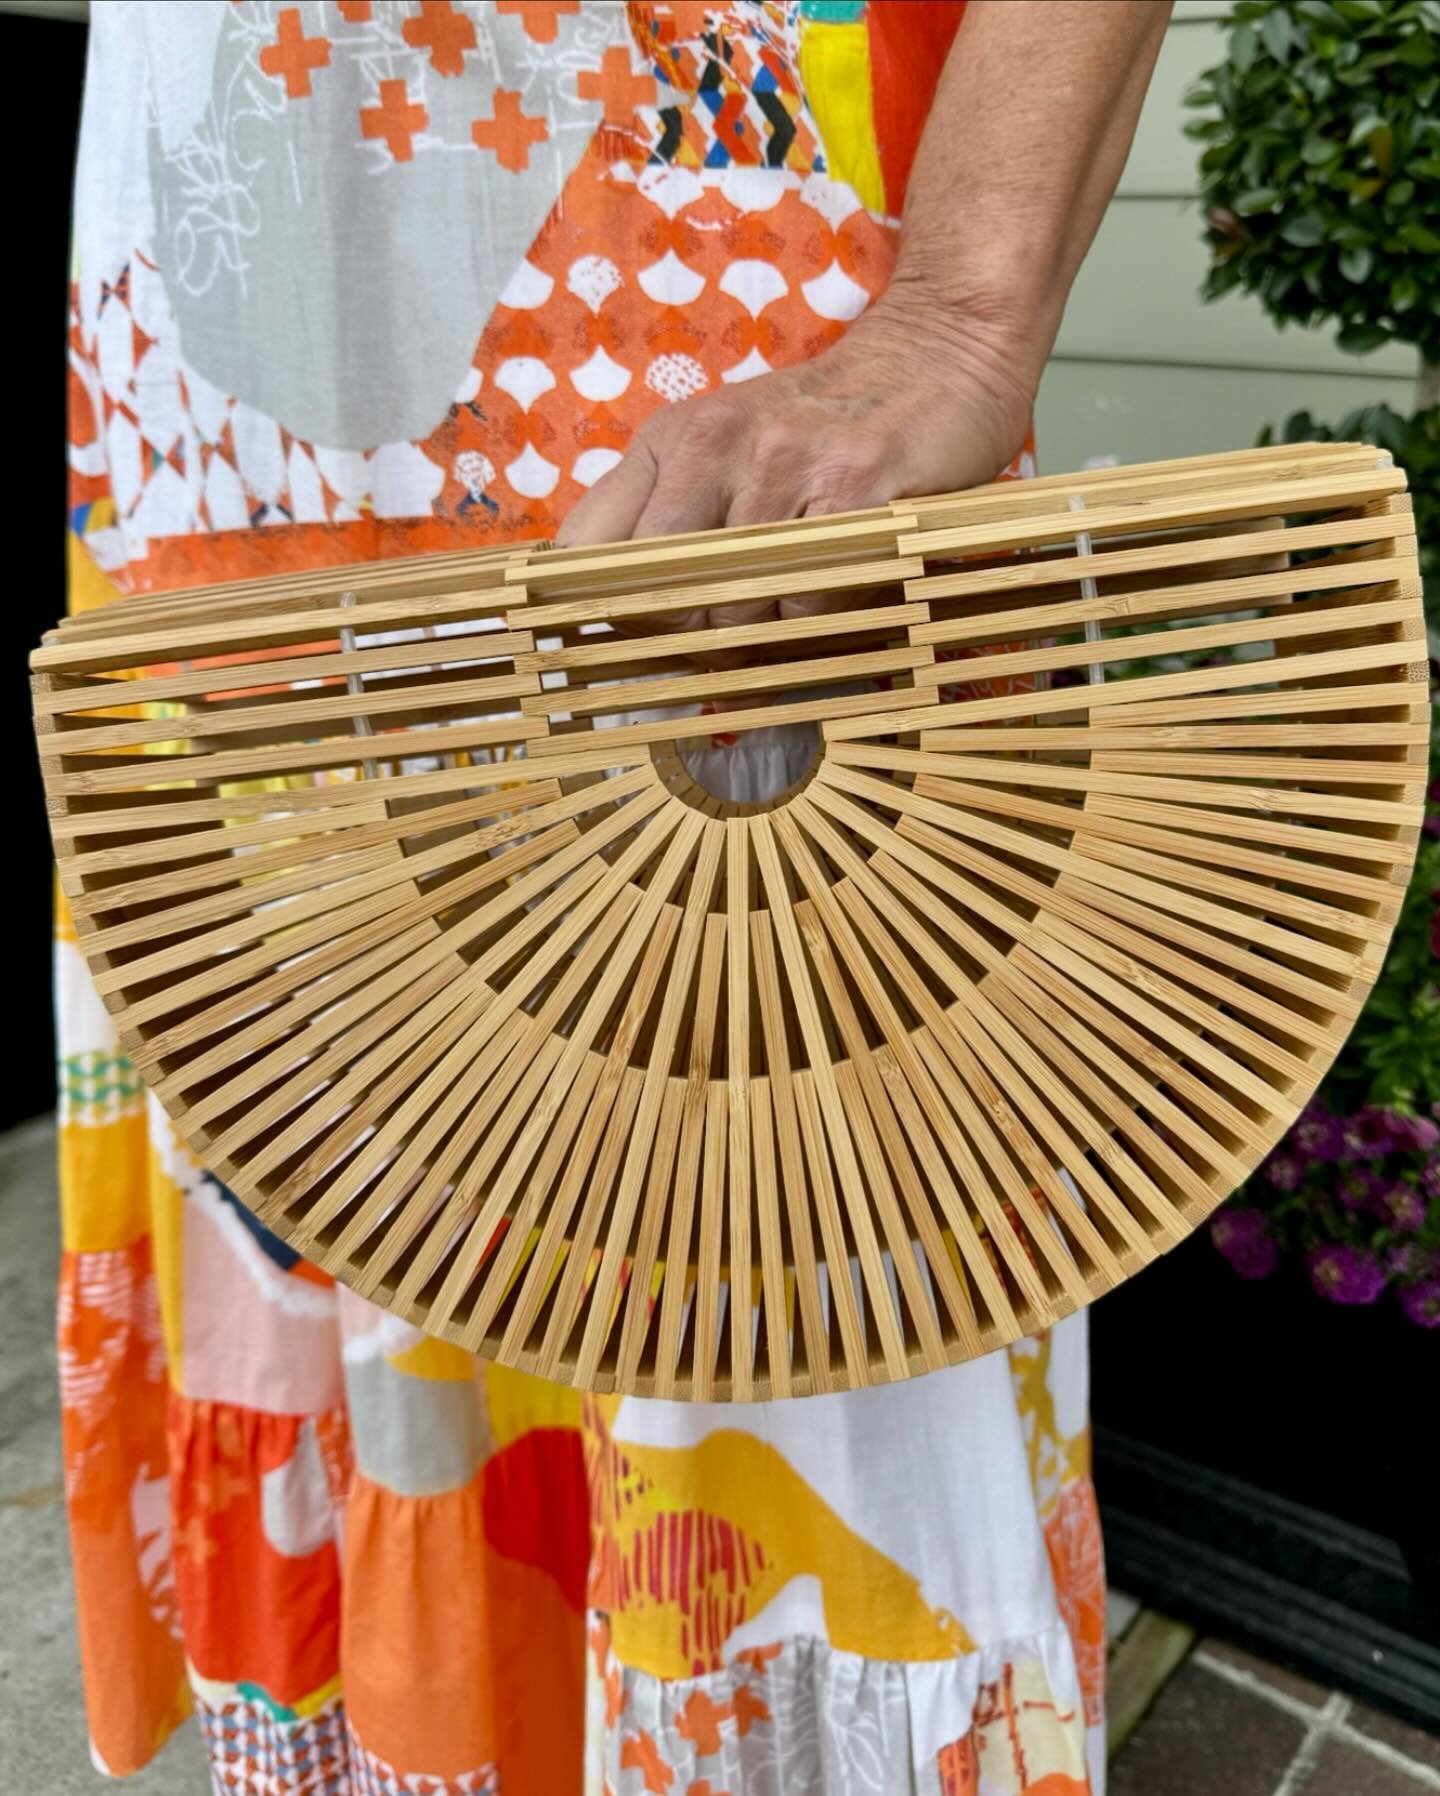 The perfect summer bag DOES exist ✨✨✨

#consigningwomen #consignment #cw #consigning #cwlooks #purses #bags #bag #summer #summerpurse #seasonal #season #summerseason #springtime #consigning #explorechs #ootd #accessorize #charleston #mtp